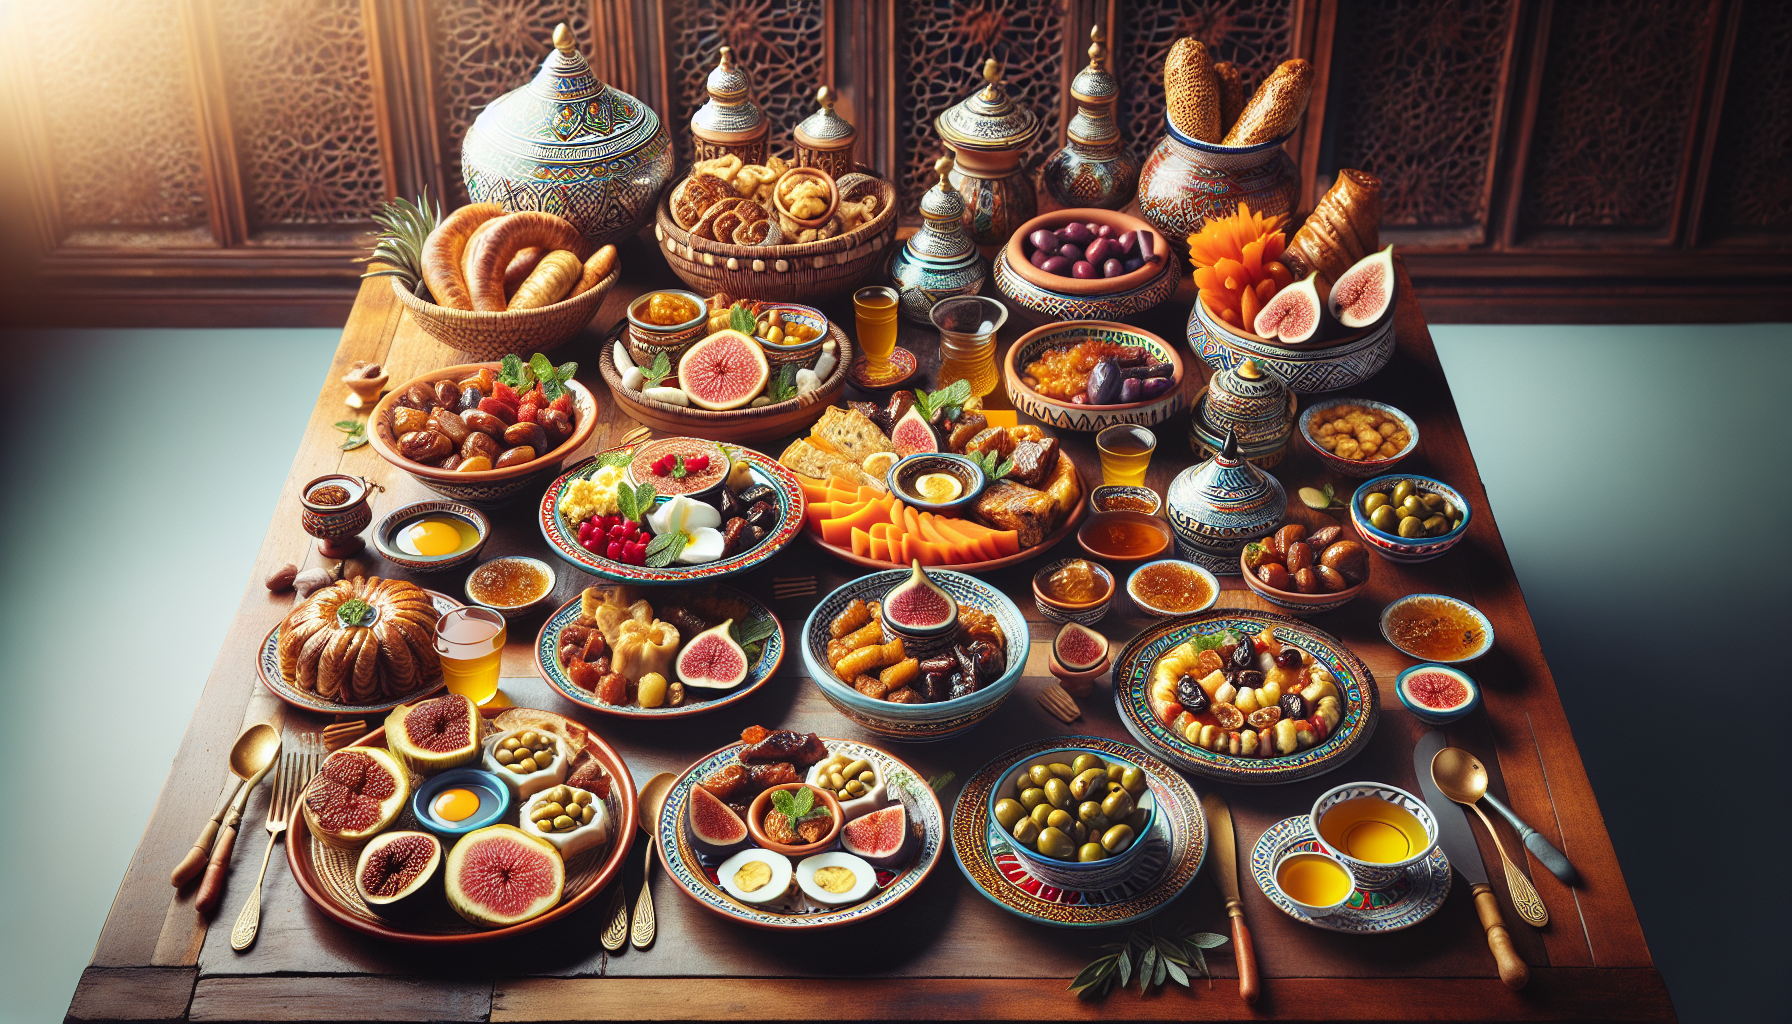 Whats Your Favorite Moroccan Breakfast Recipe For A Flavorful Start To The Day?